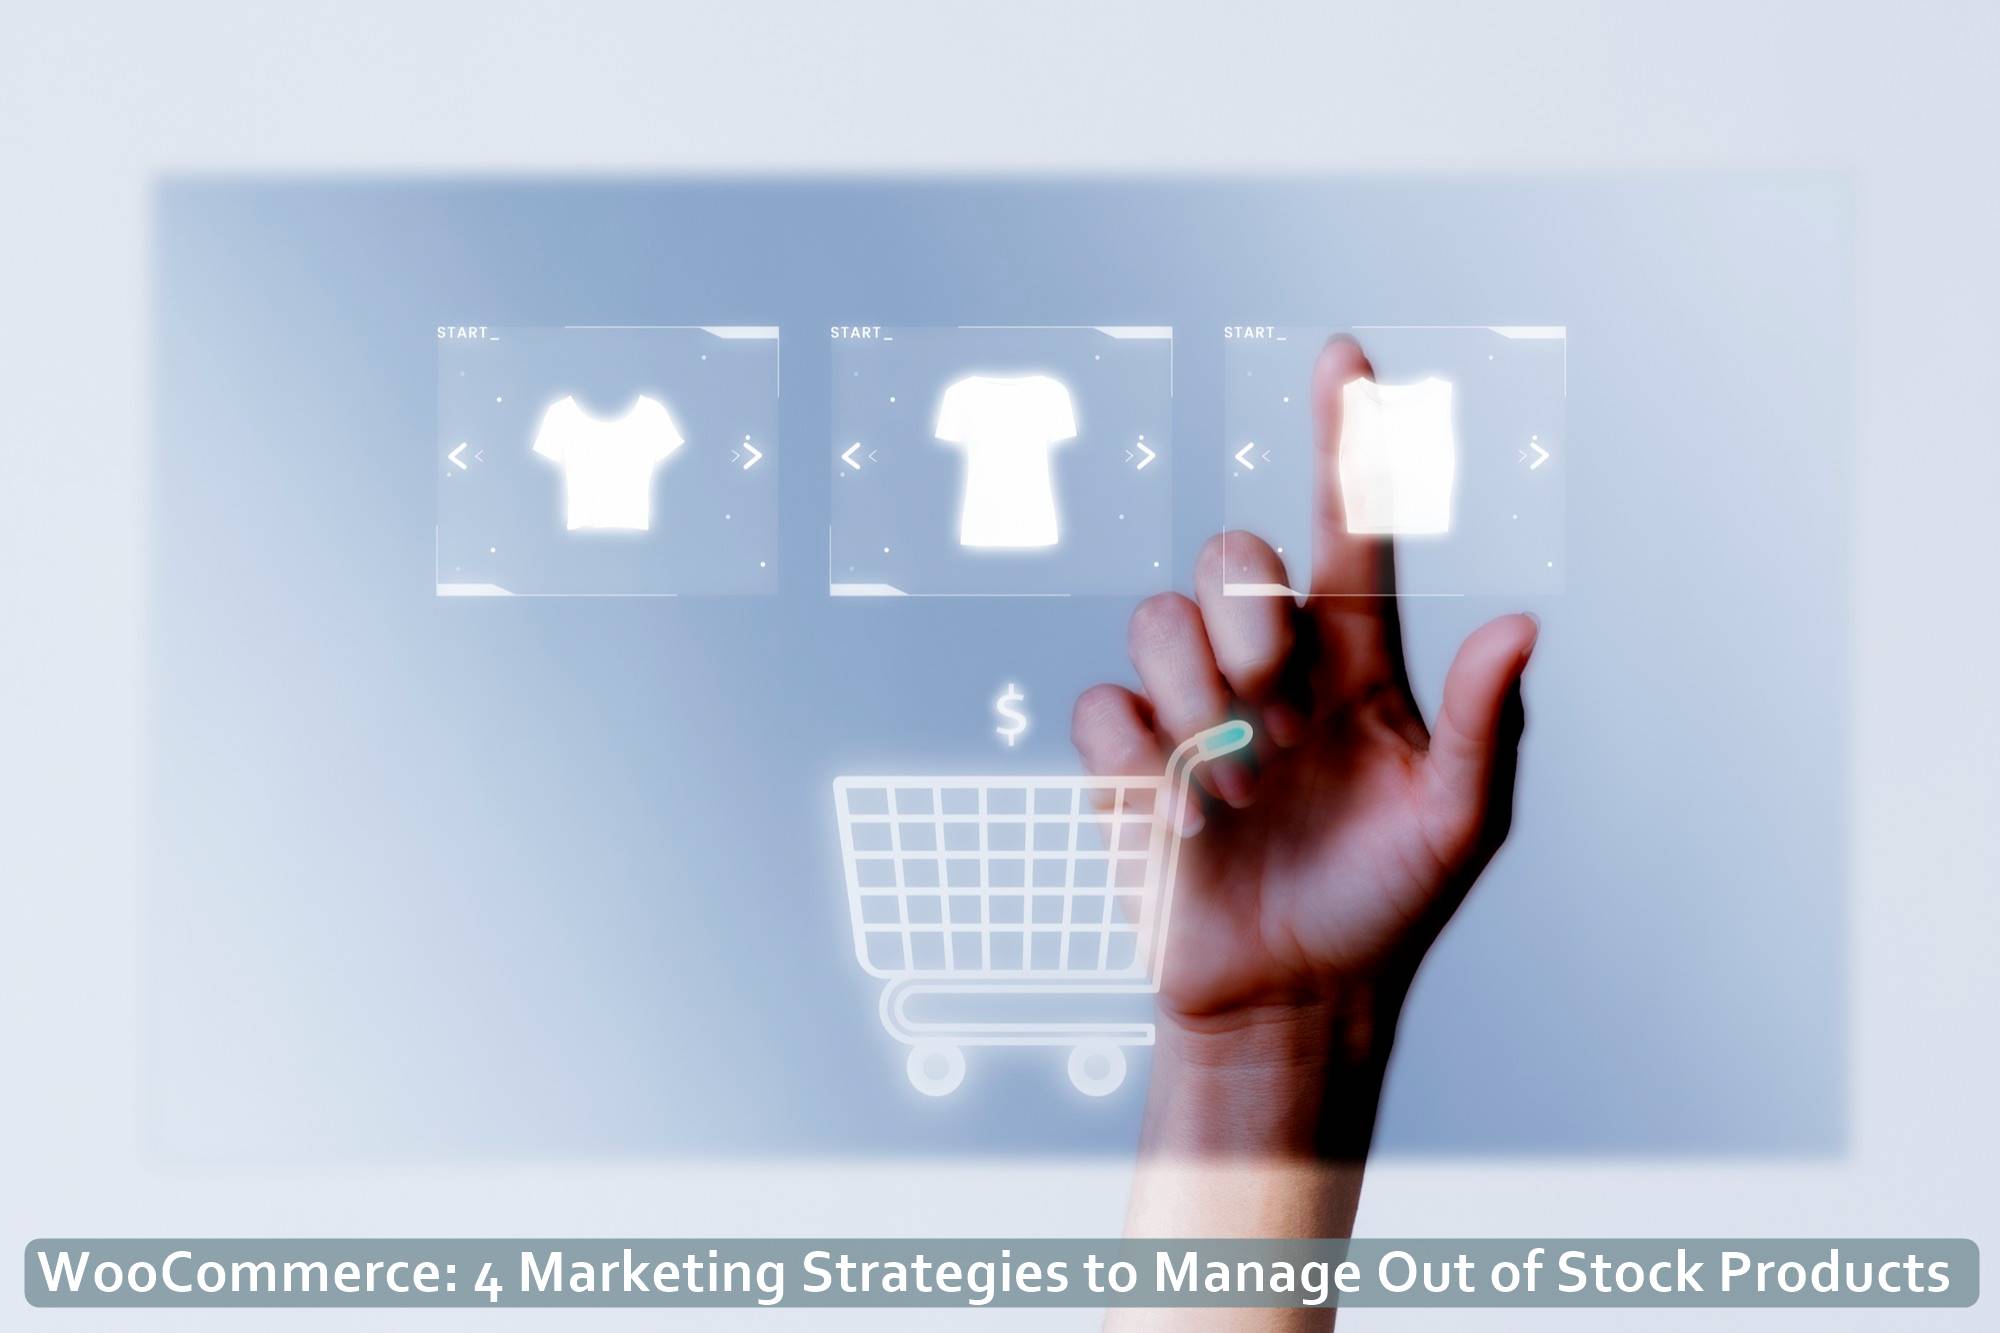 WooCommerce: 4 Marketing Strategies to Manage Out-of-Stock Products